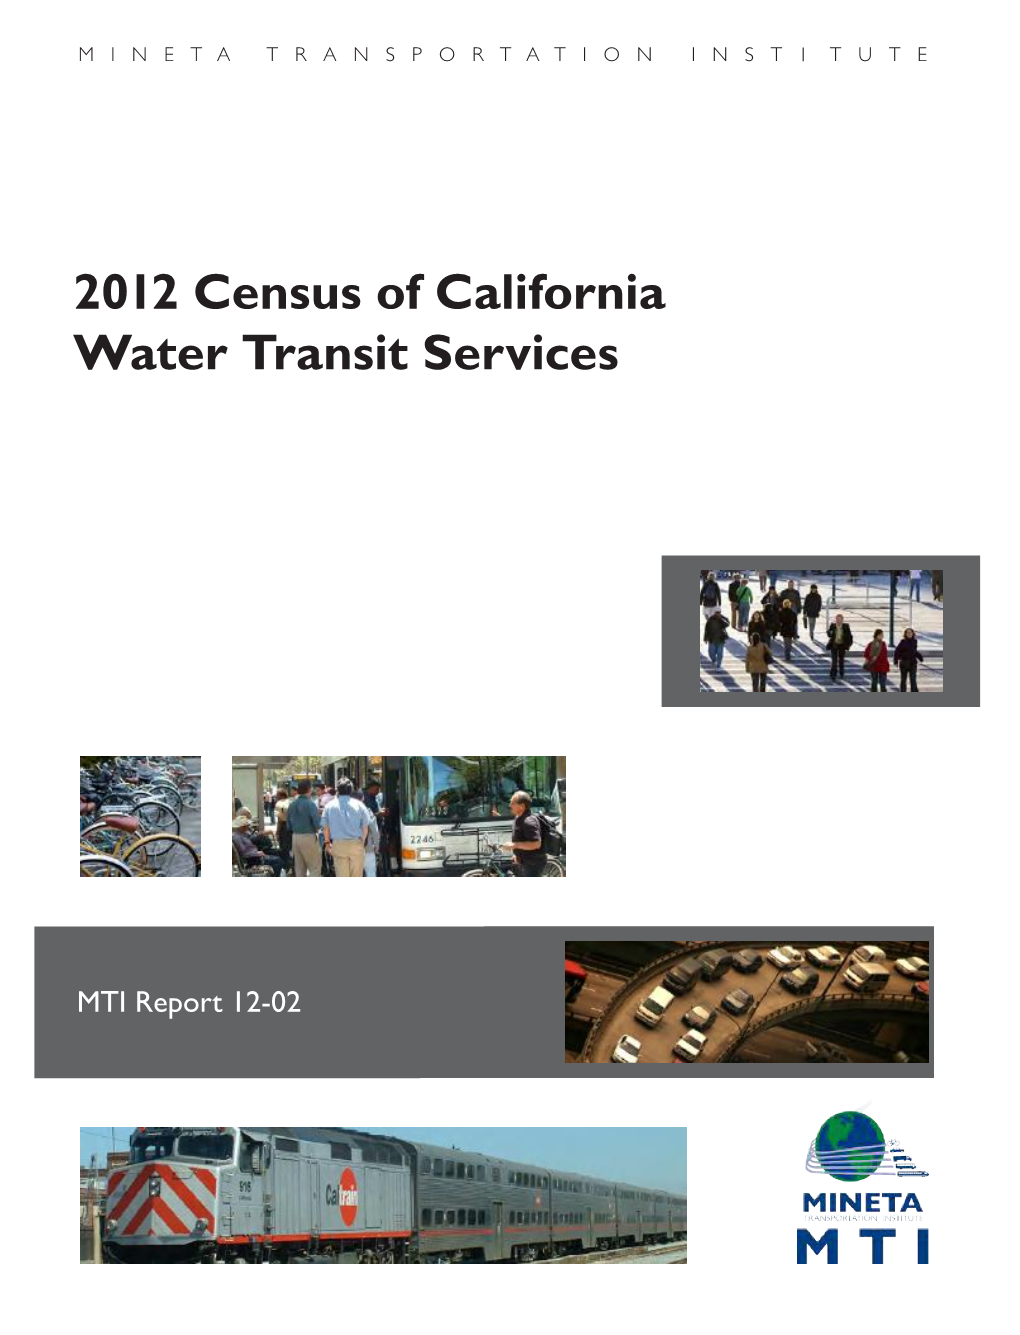 2012 Census of California Water Transit Services